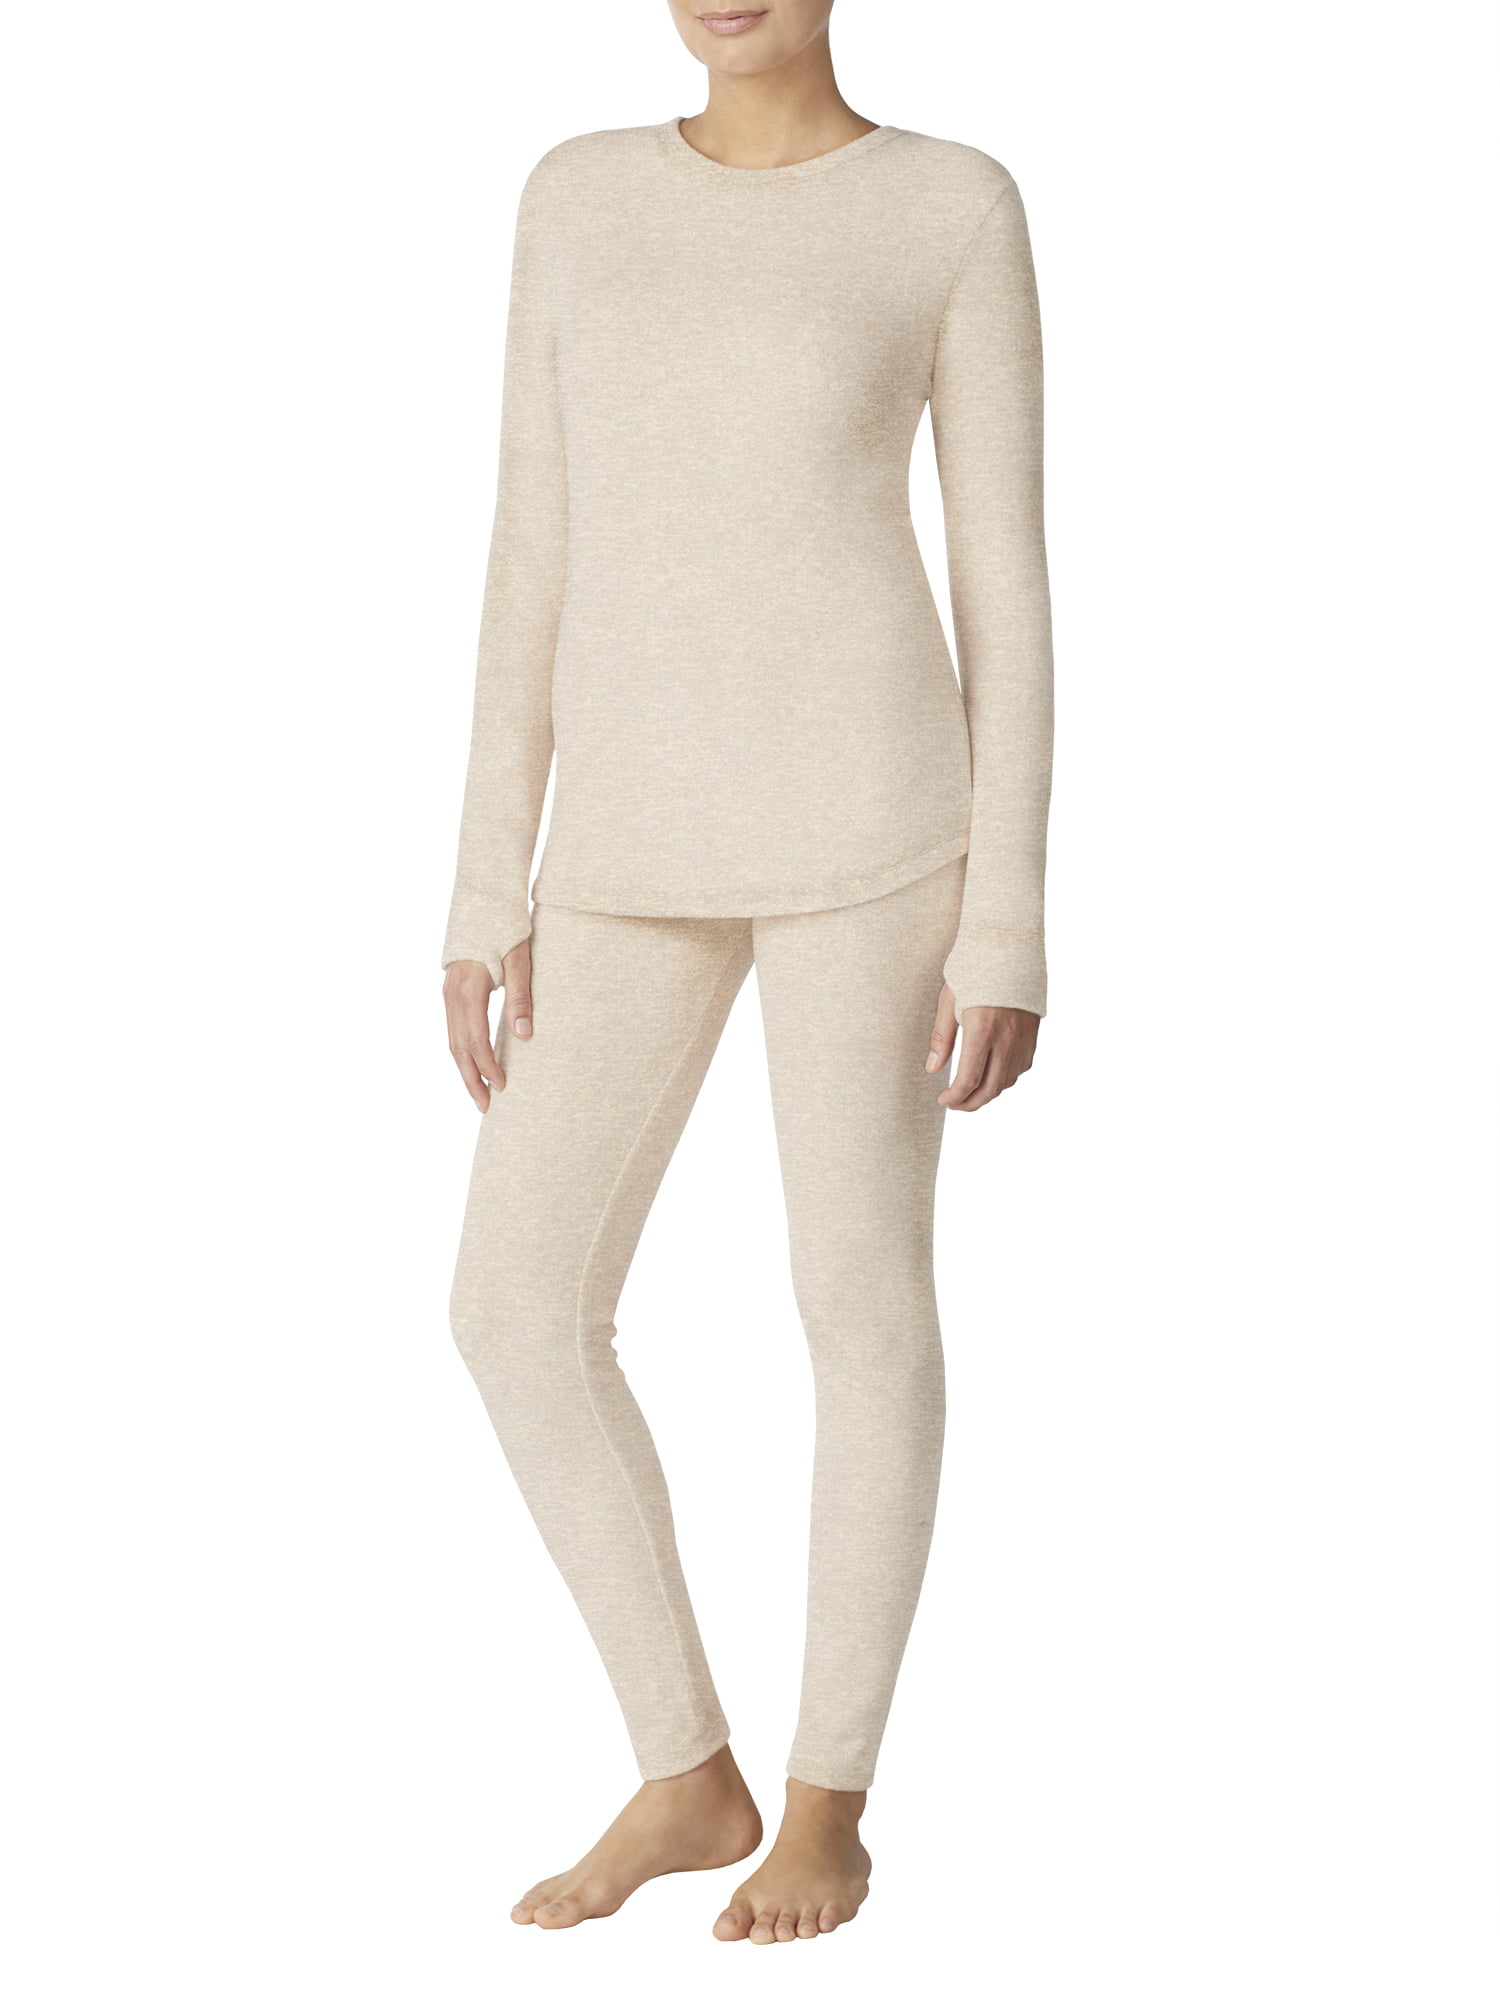 ClimateRight by Cuddl Duds - cuddl duds climateright women's stretch ...